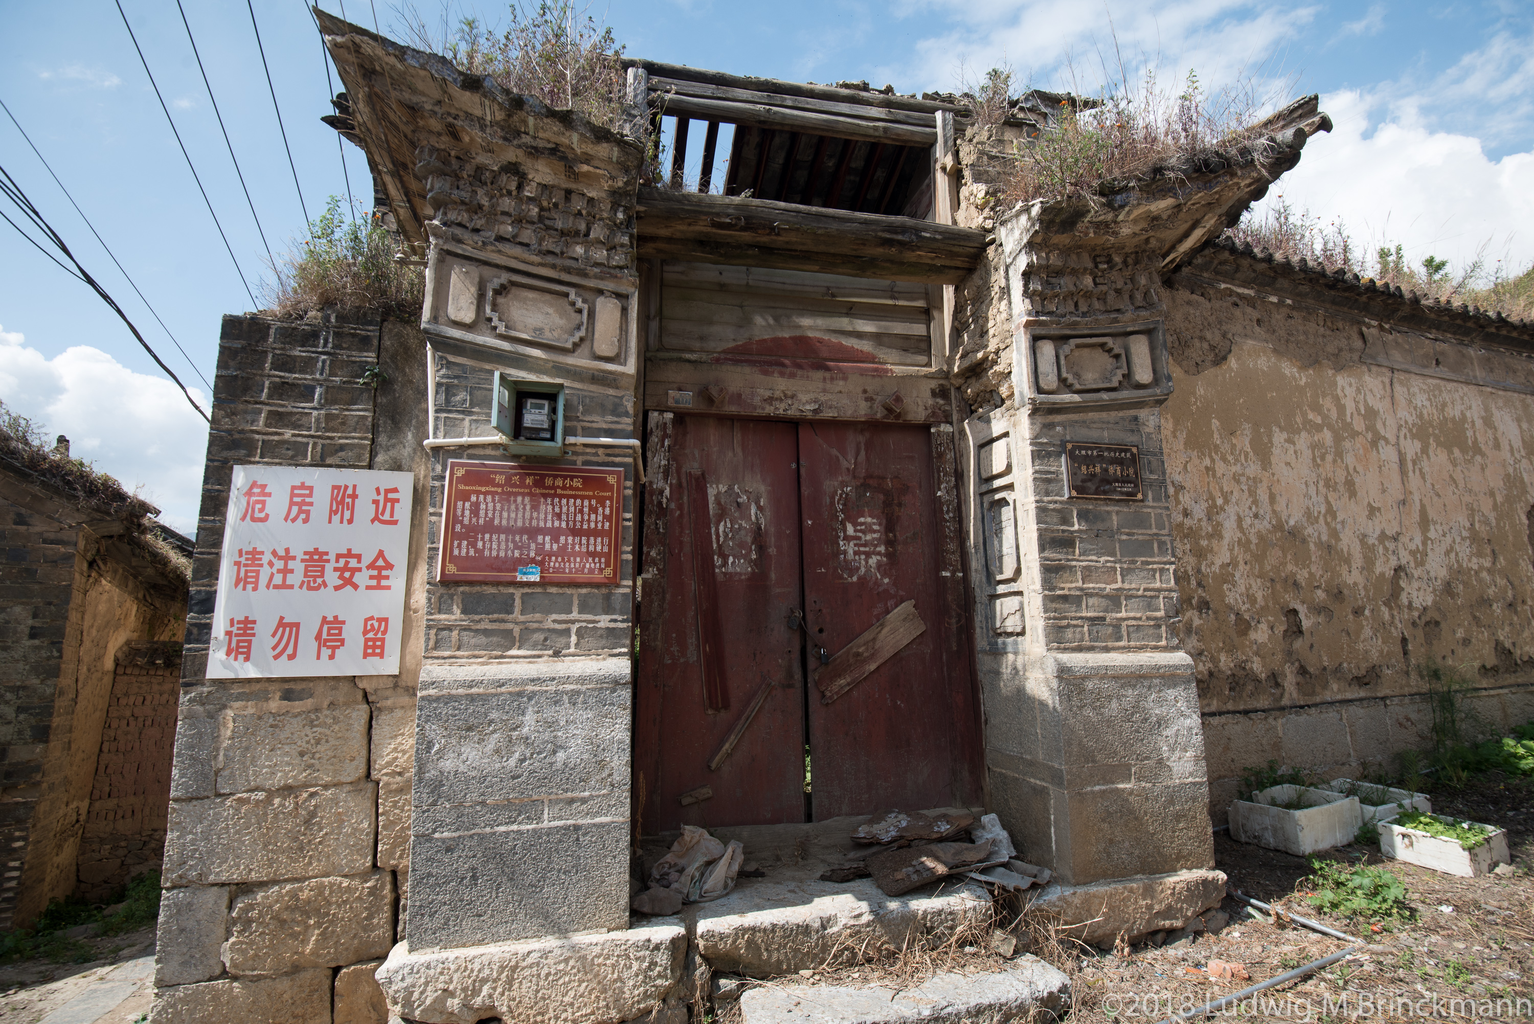 Picture: Ruin of a merchant center in Xiaguan's old town.